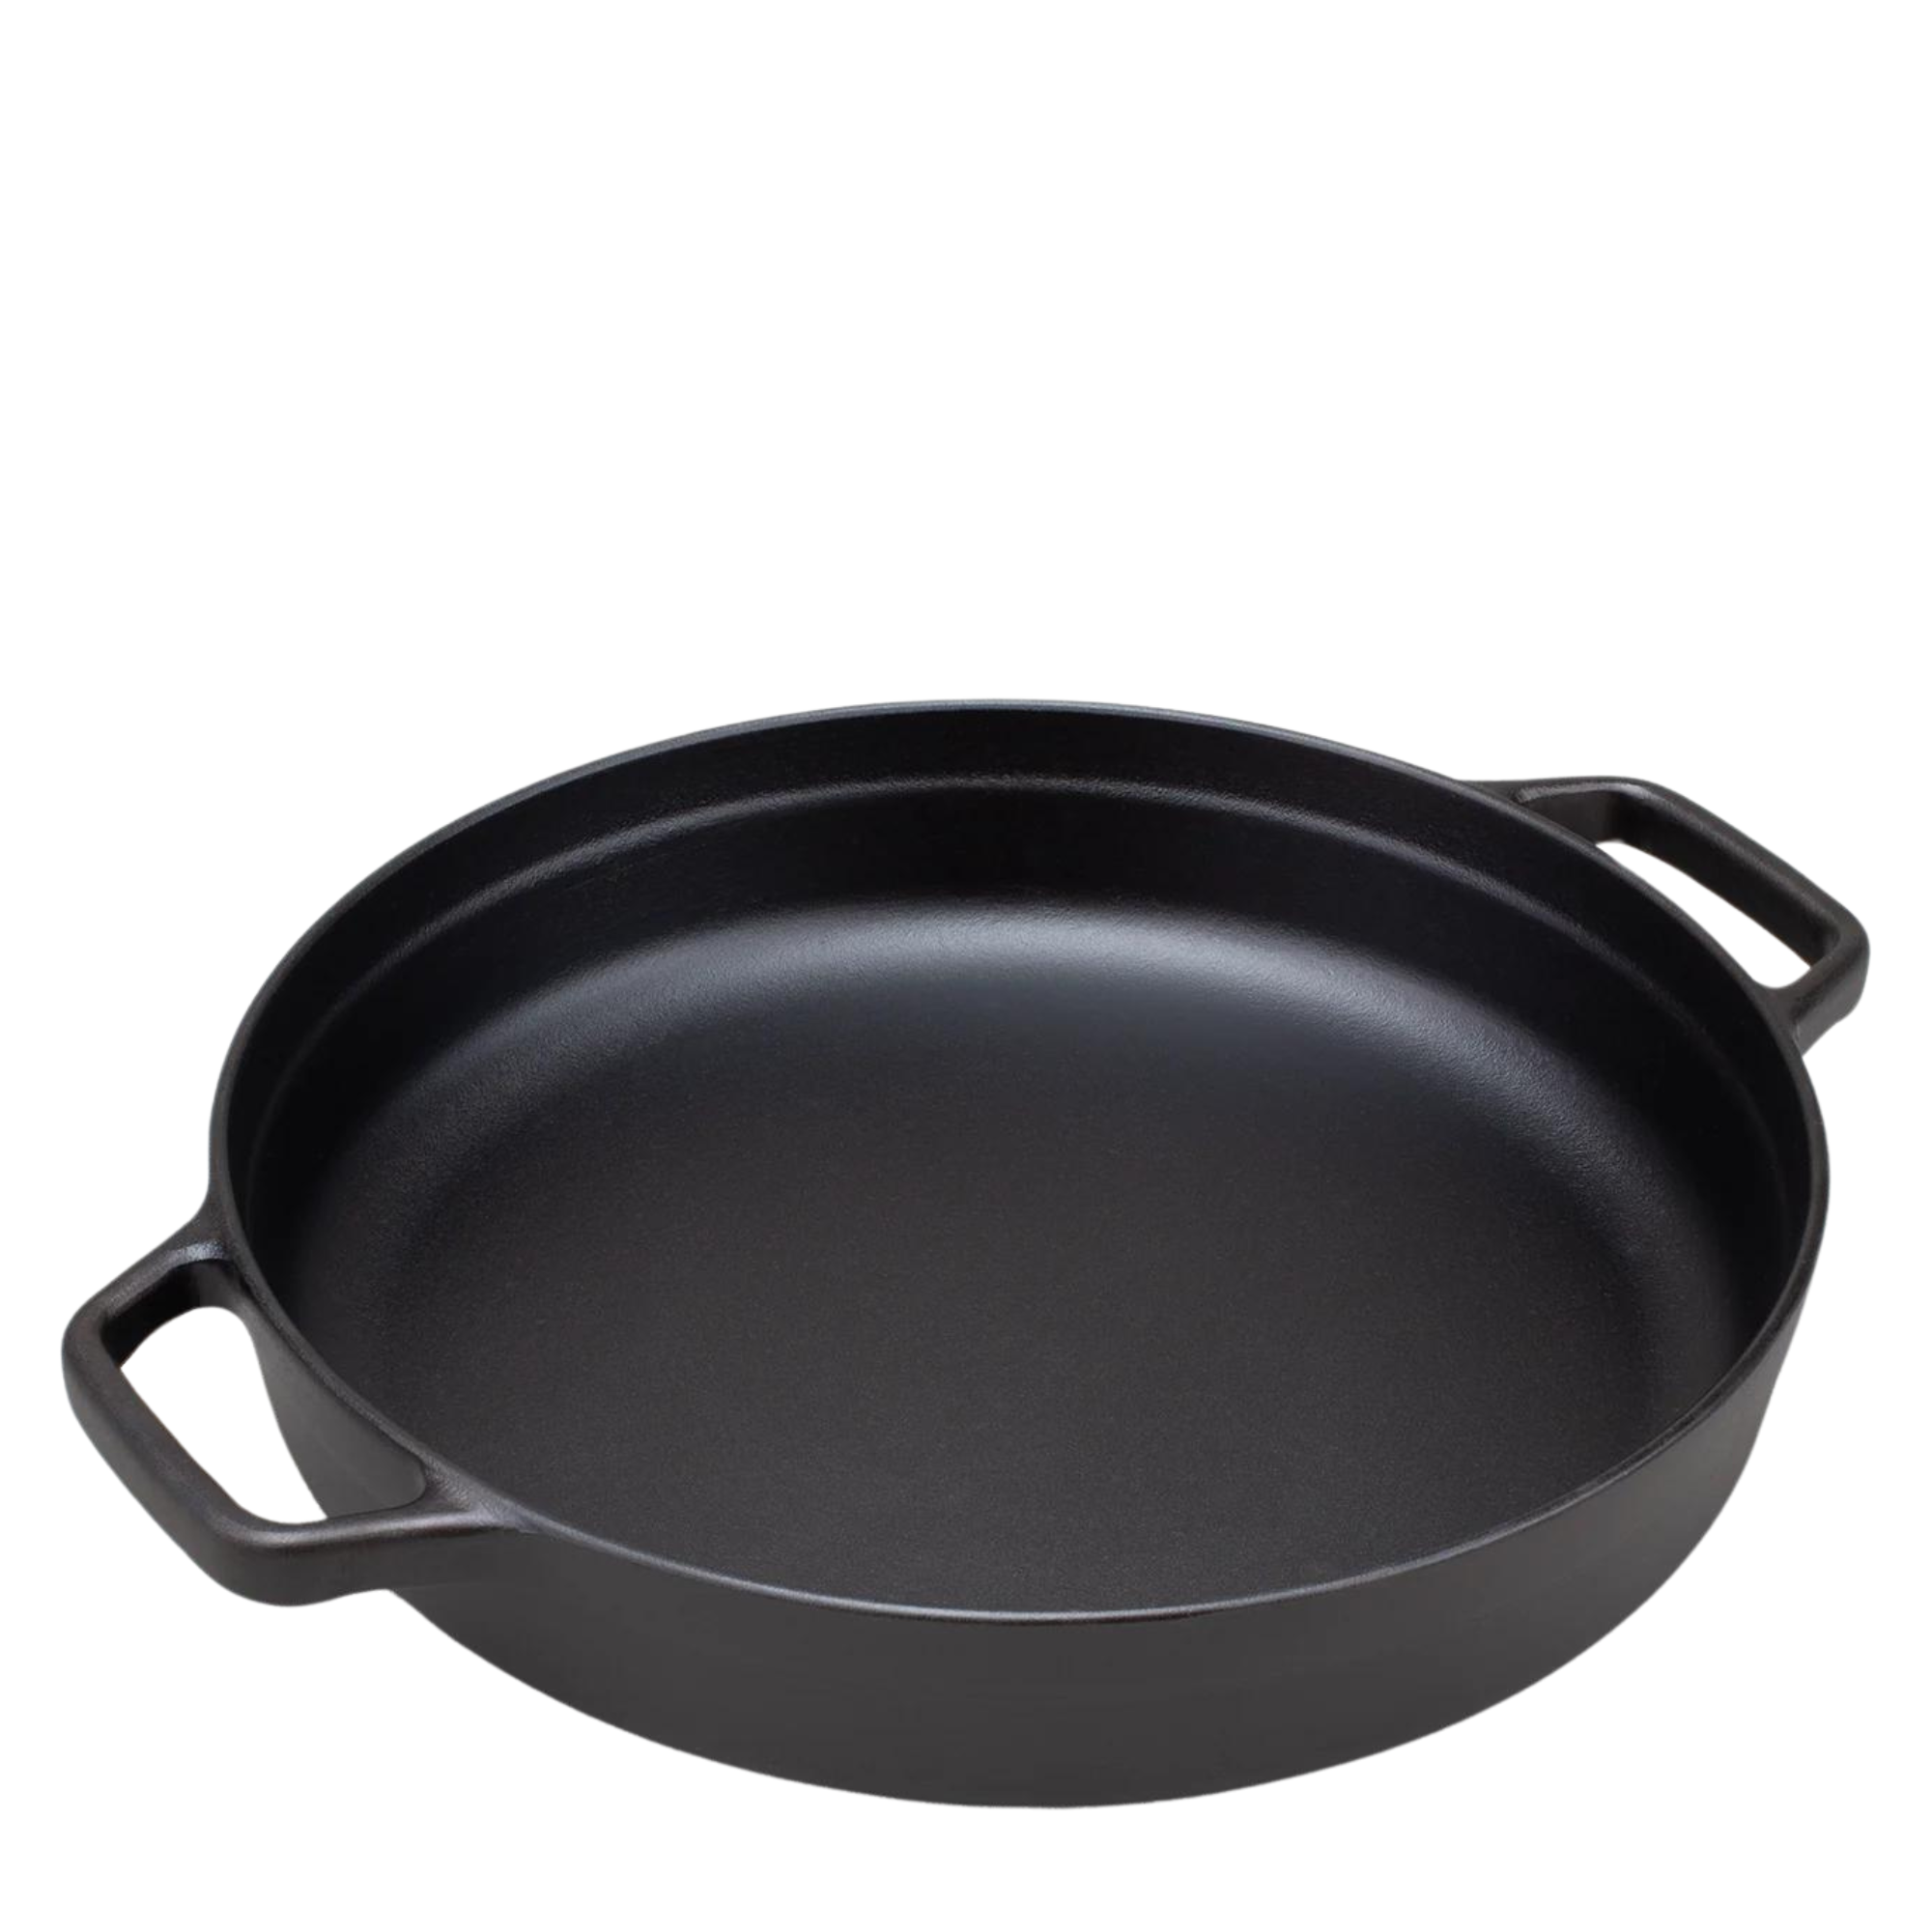 12-inch braising skillet, featuring a flat, wide cooking surface and tall sides, perfect for slow-cooking meat, vegetables, and sauces.